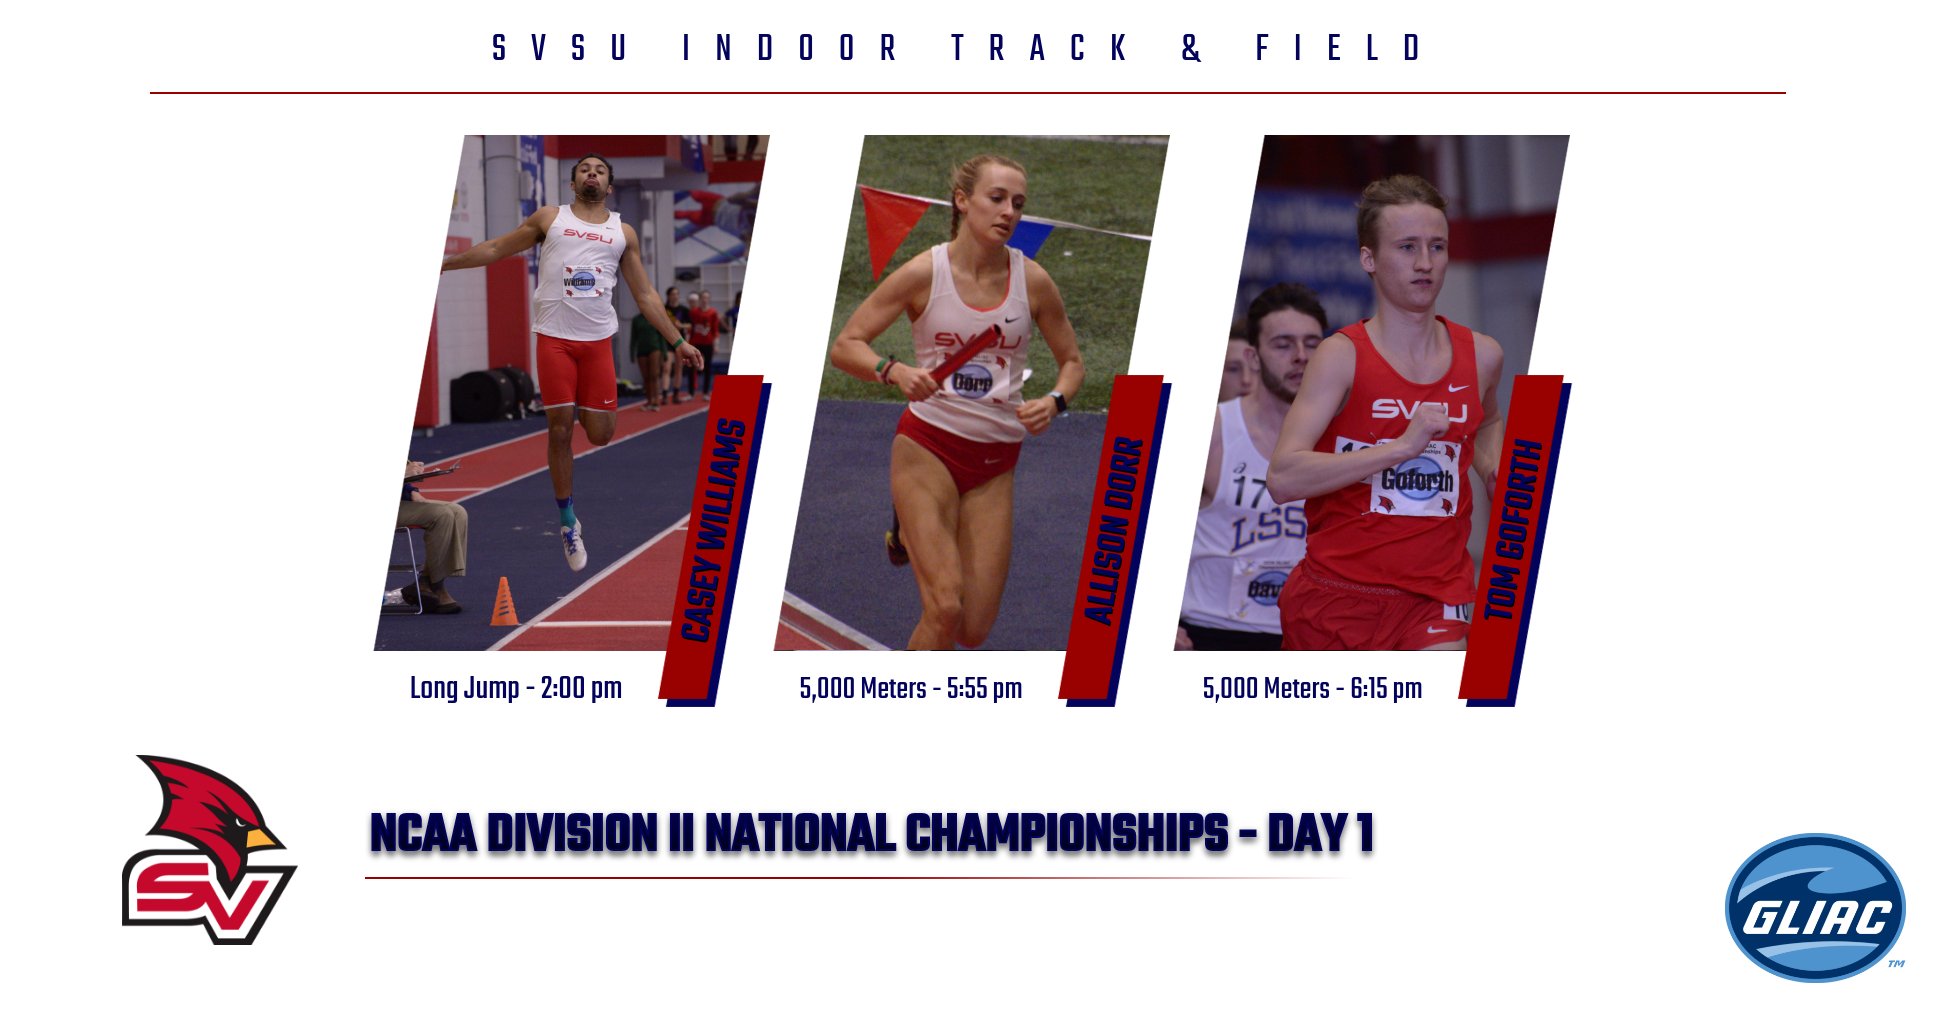 Three Cardinals compete on day one of NCAA Championships